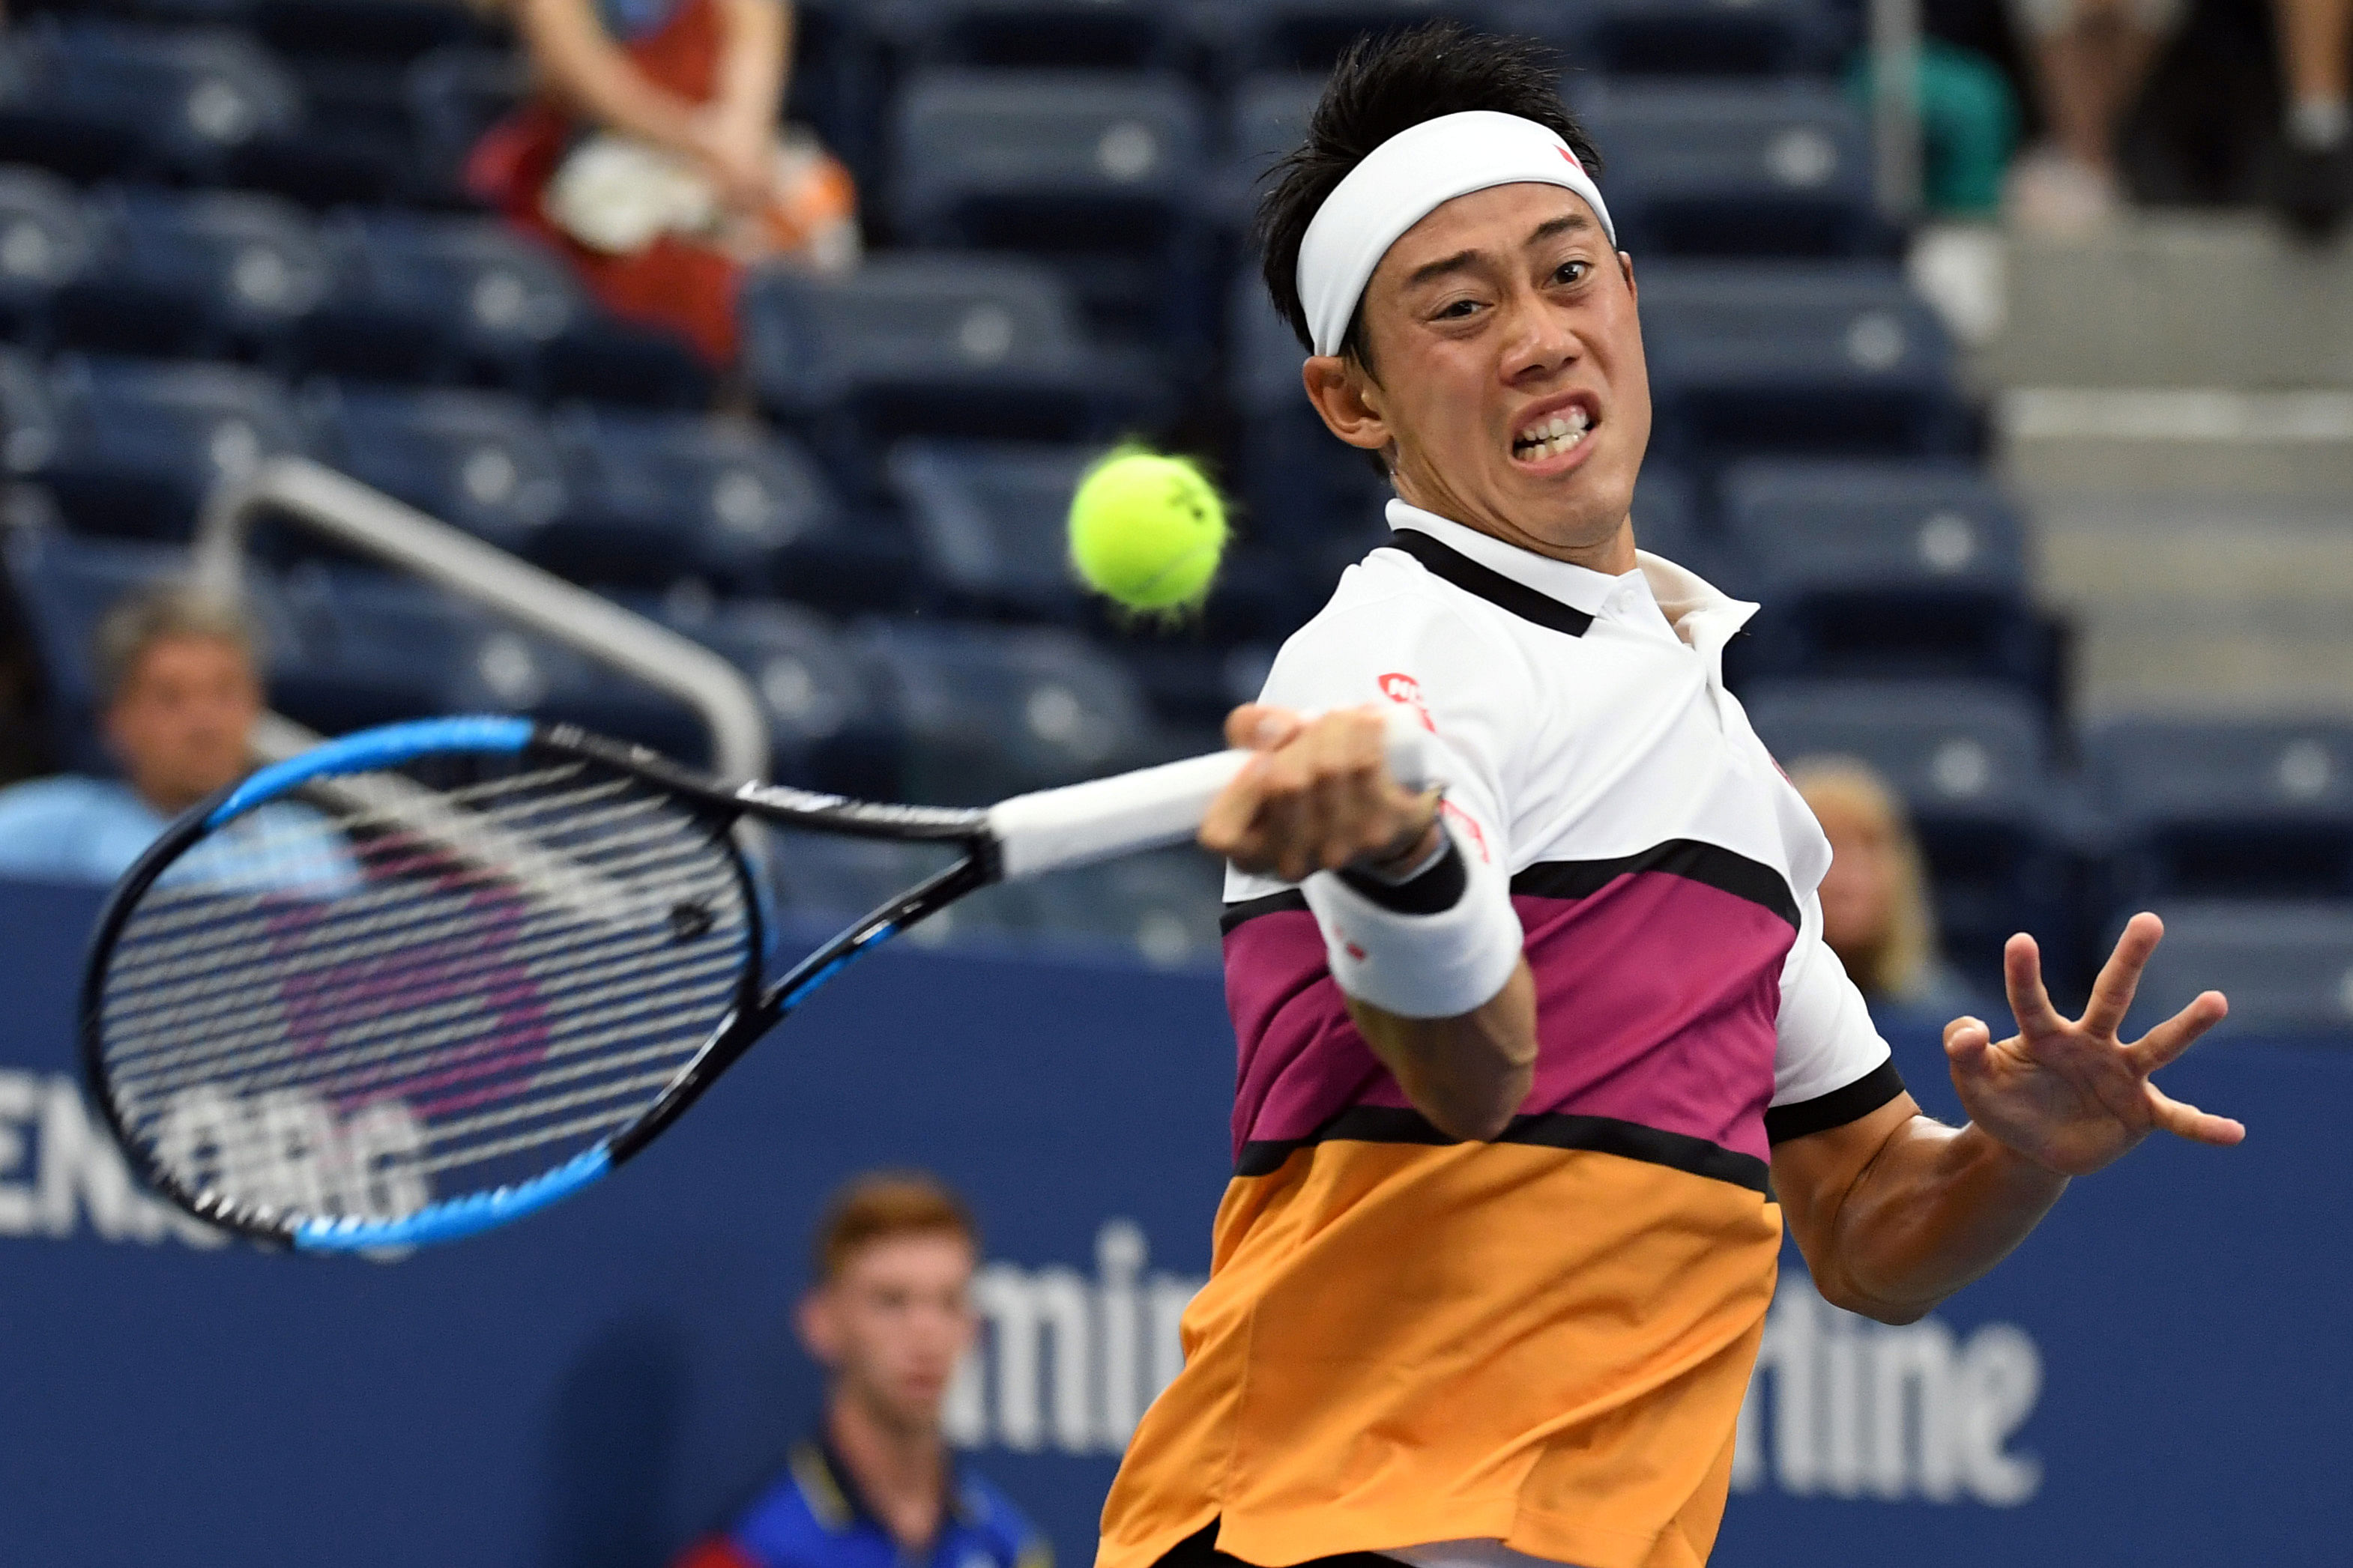 Kei Nishikori of Japan in second round action on day three of the 2019 US Open tennis tournament at USTA Billie Jean King National Tennis Center. (Reuters Photo)